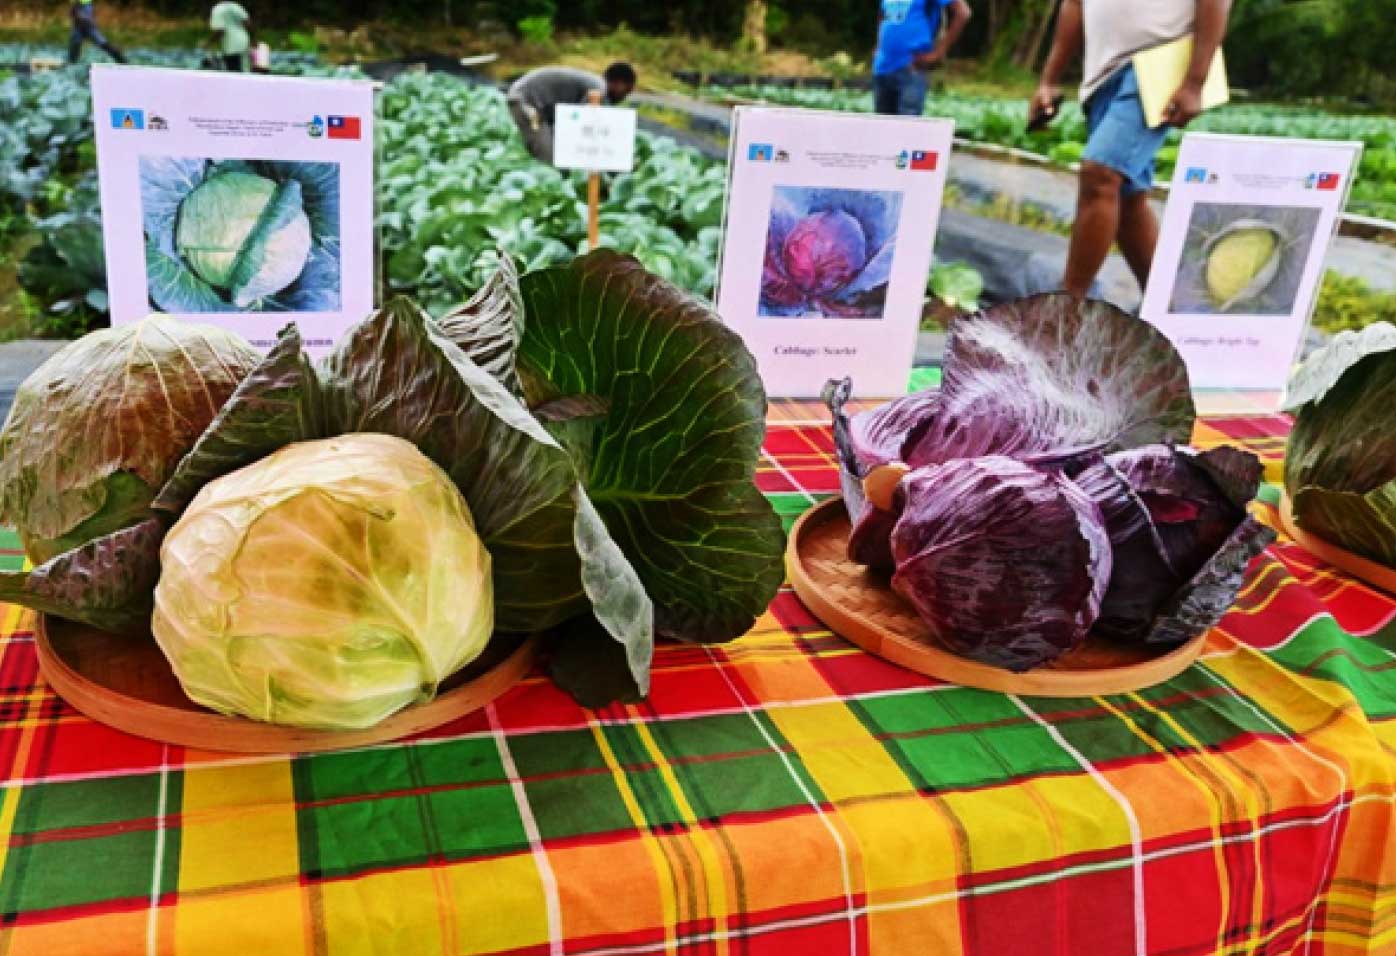 Varieties of cabbage for the trial were Bright Top, Summer Autumn, and Scarlet.